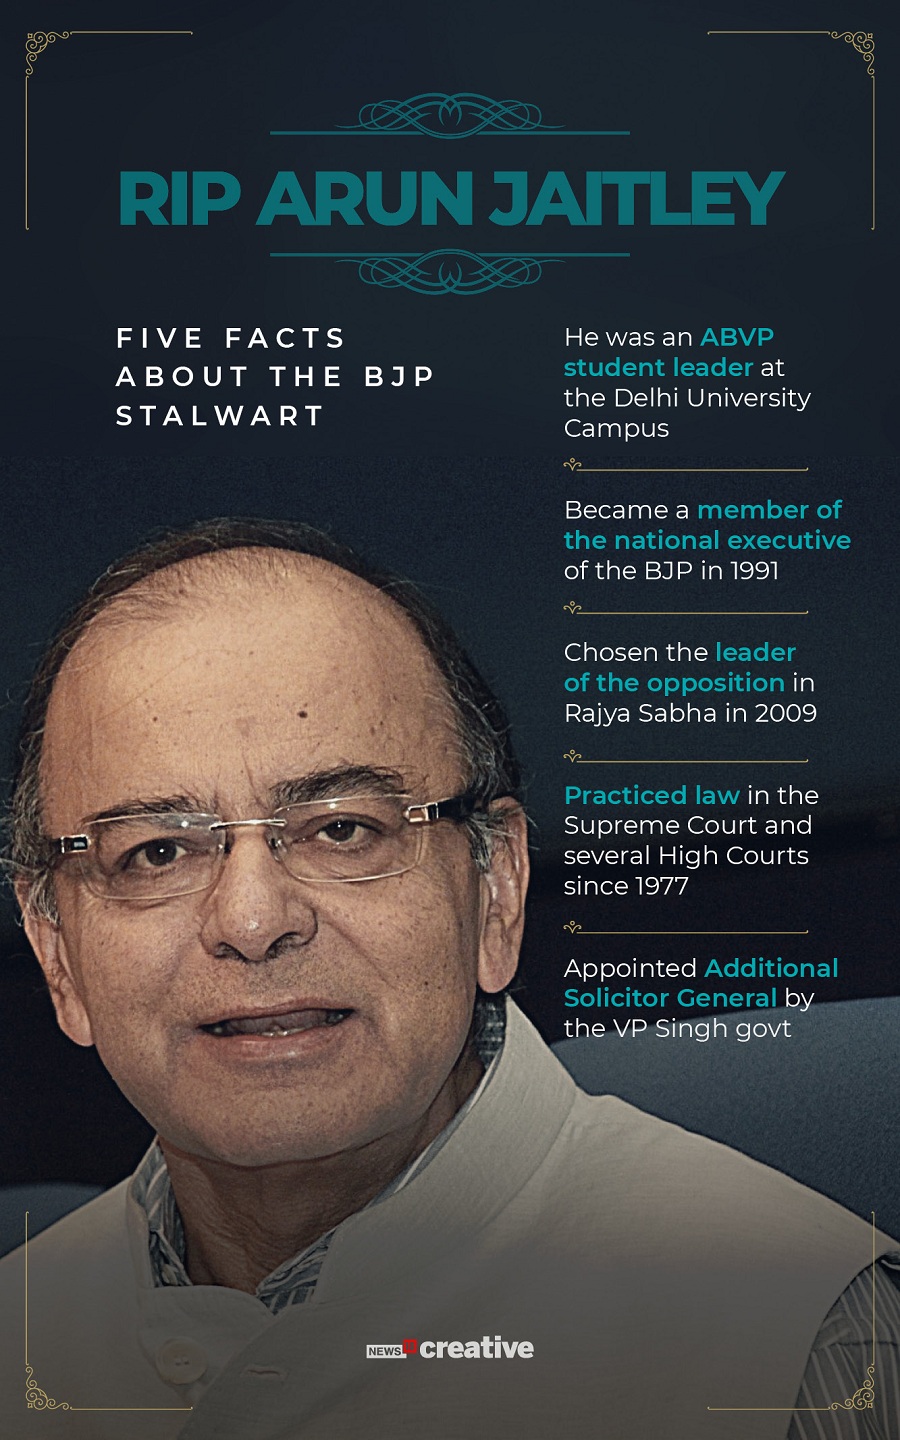 RIP Arun Jaitley: Five facts about the former Finance Minister and BJP stalwart